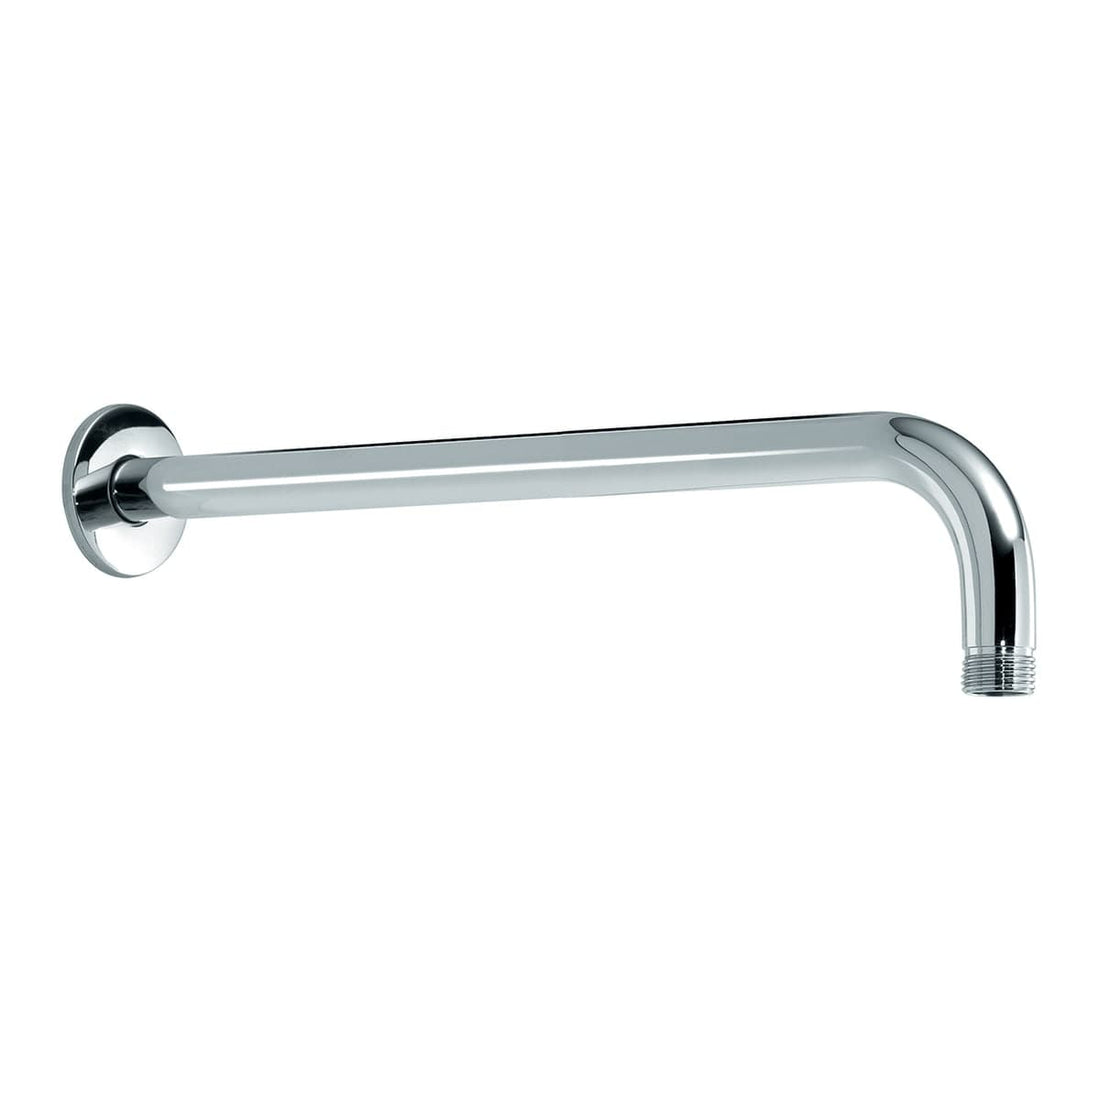 CURVED WALL SHOWER ARM 30 CM LENGTH - best price from Maltashopper.com BR430005152